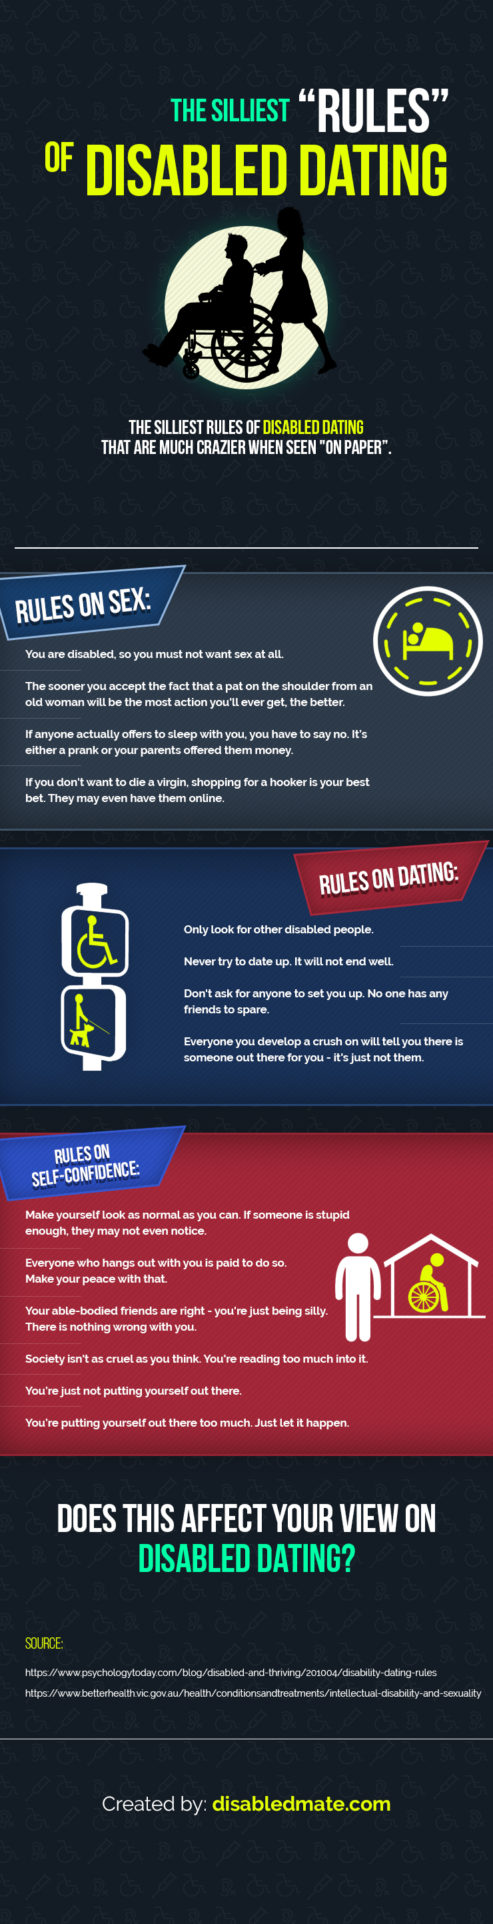 The Silliest Rules of Disabled Dating